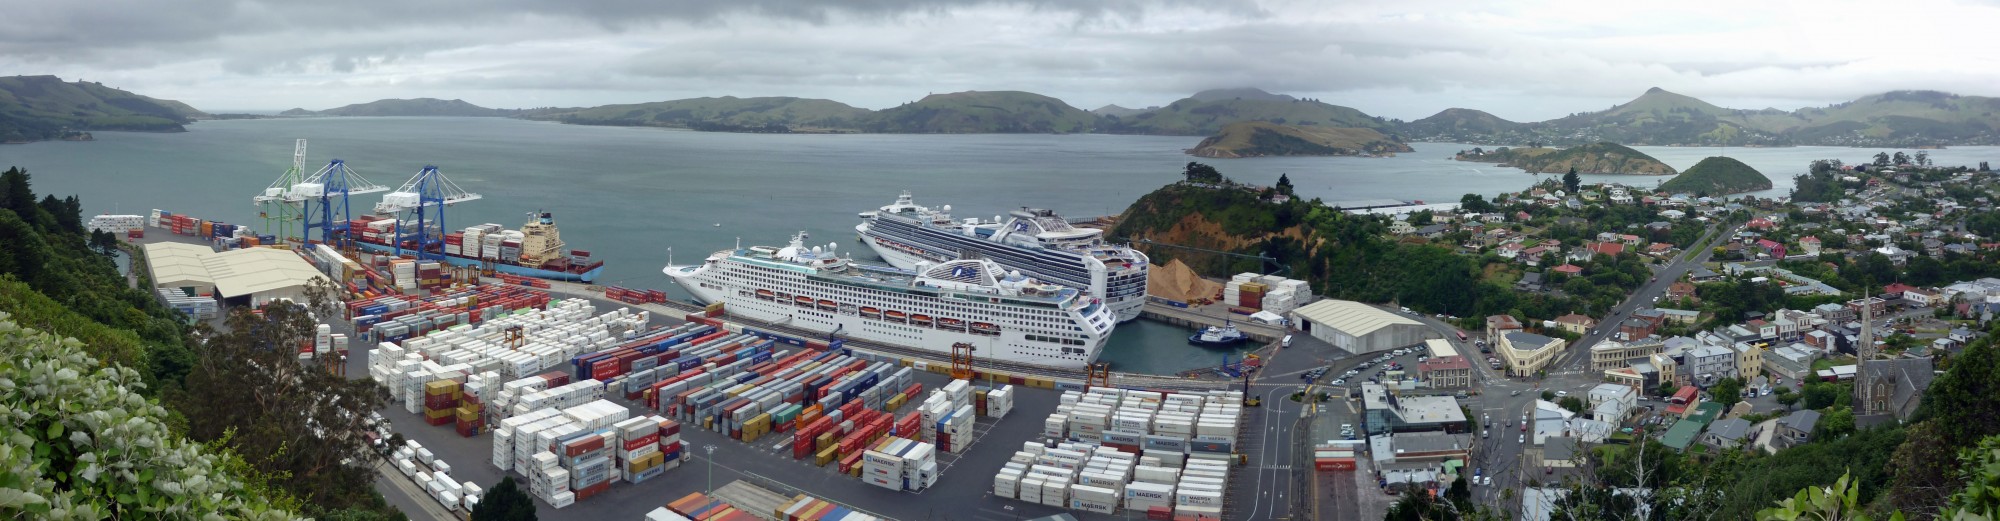 Busy Port Chalmers